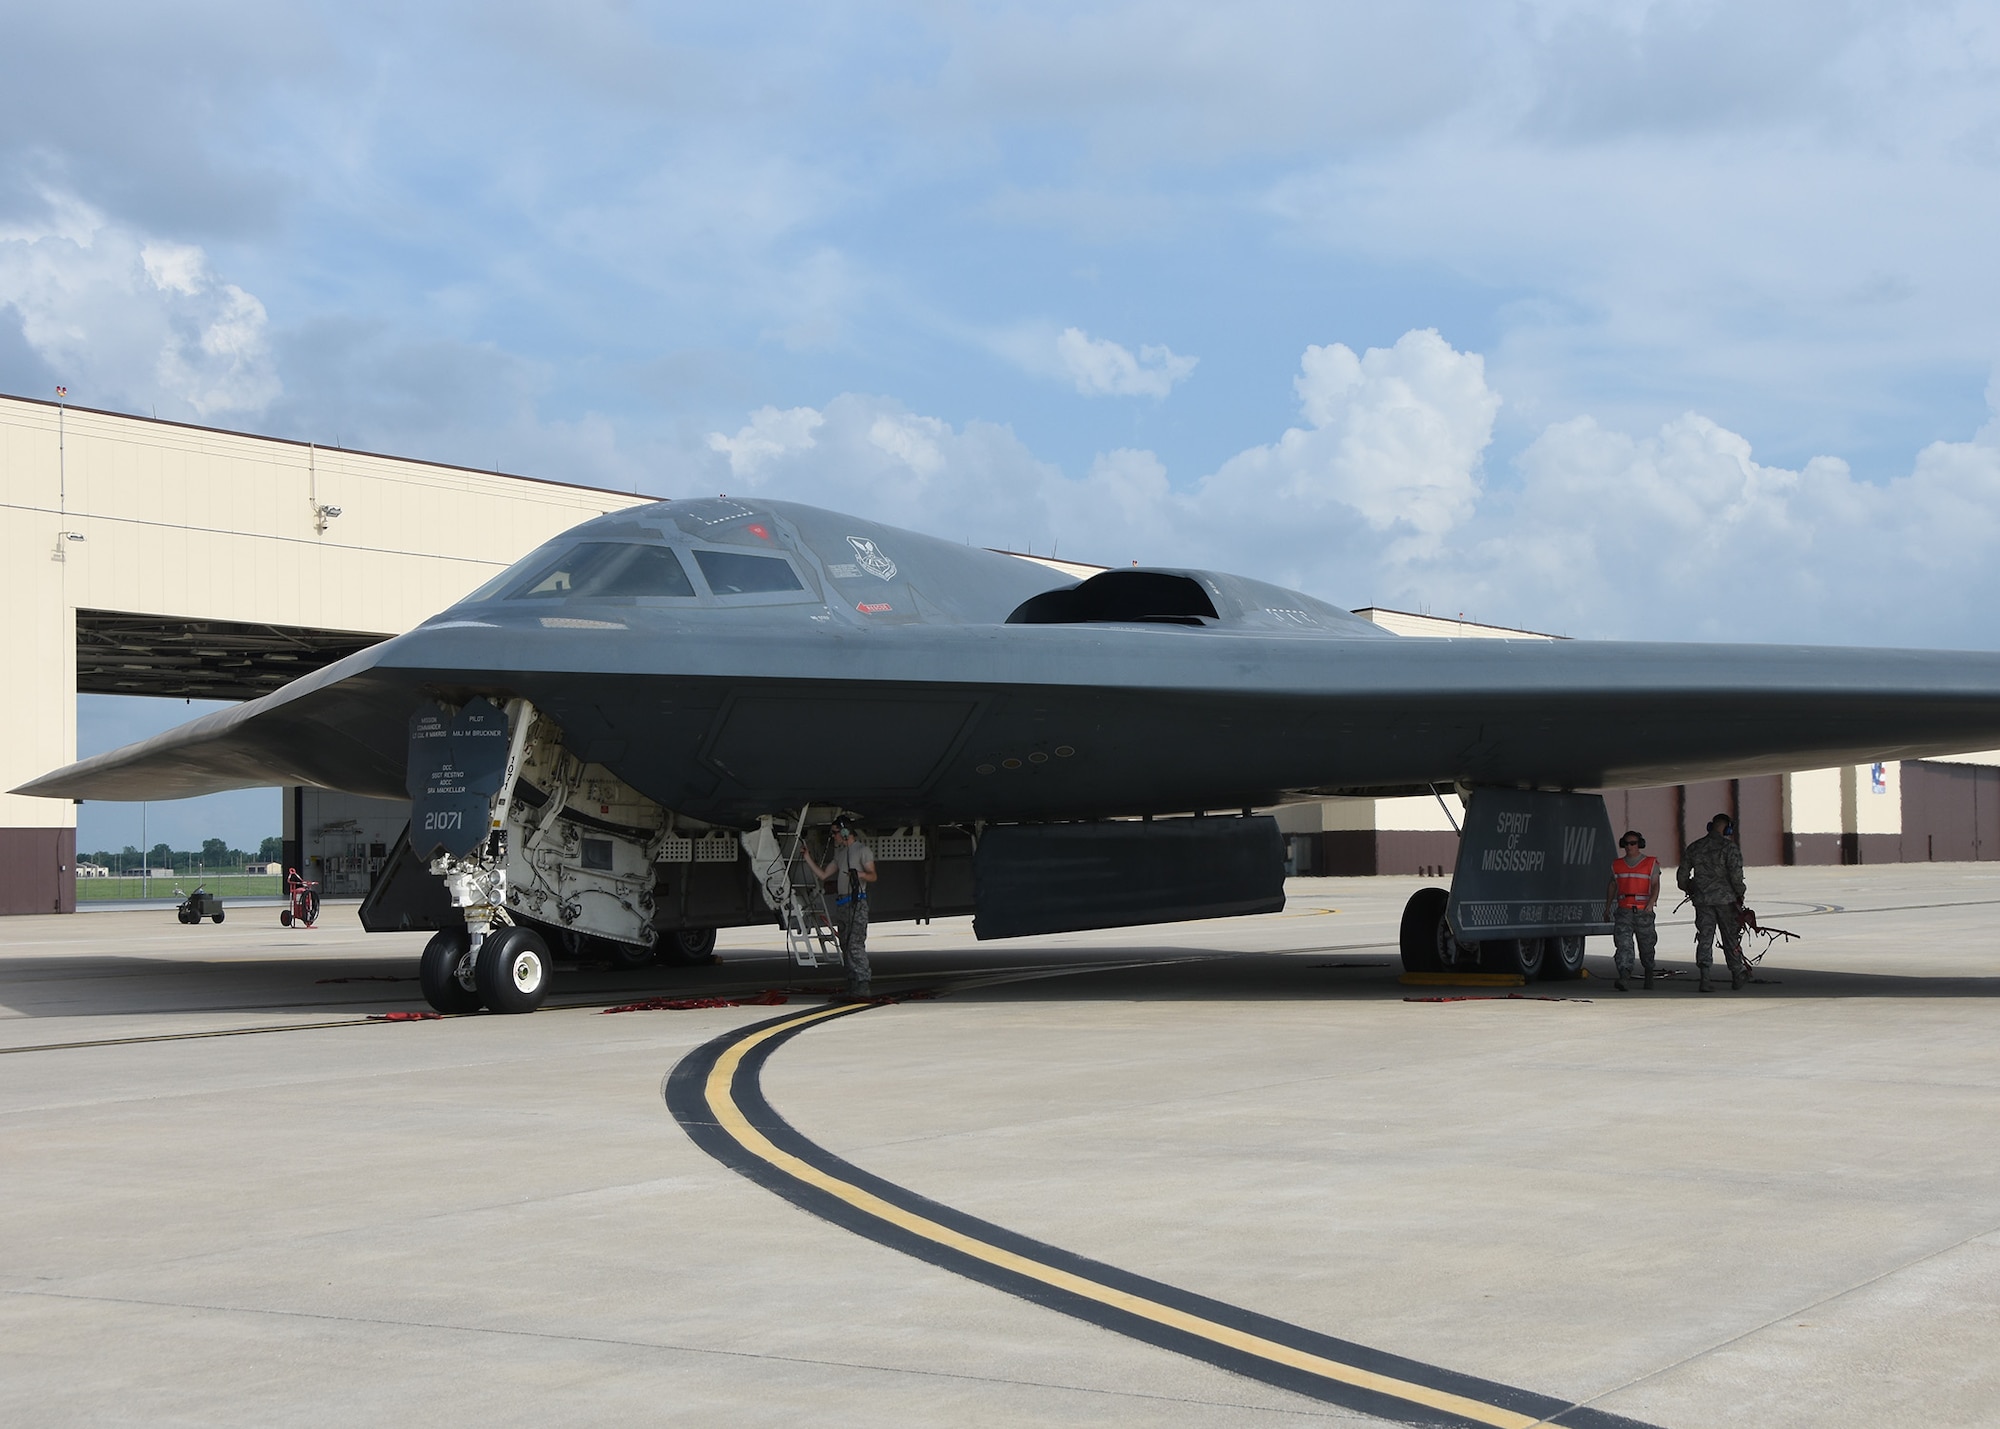 Airmen from the 131st Maintenance Group perform landing checks on the B-2 Spirit of Mississippi prior to Lt. Col. Jared Kennish exiting the aircraft, July 9, 2016 at Whiteman Air Force Base.  During his mission, Kennish crossed the 1,500 flying-hour mark.  He currently has the most hours of any pilot actively flying the B-2.   (U.S. Air National Guard photo by Senior Master Sgt. Mary-Dale Amison)